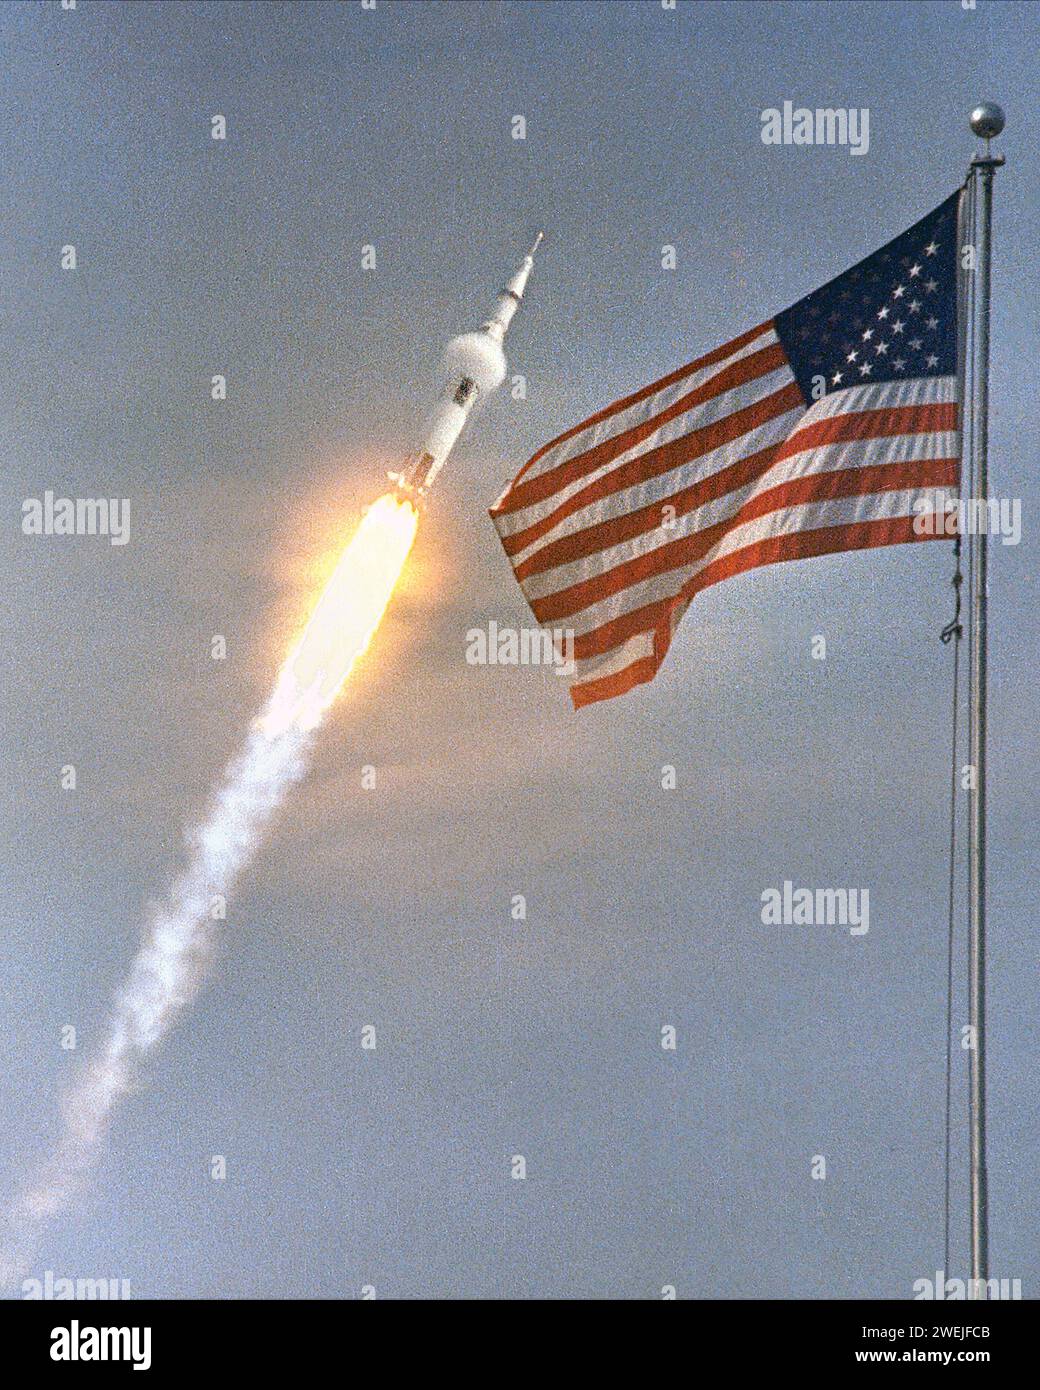 Lift-off of Apollo 11 manned spacecraft with American flag, Kennedy Space Center, Merritt Island, Florida, USA, NASA, July 16, 1969 Stock Photo